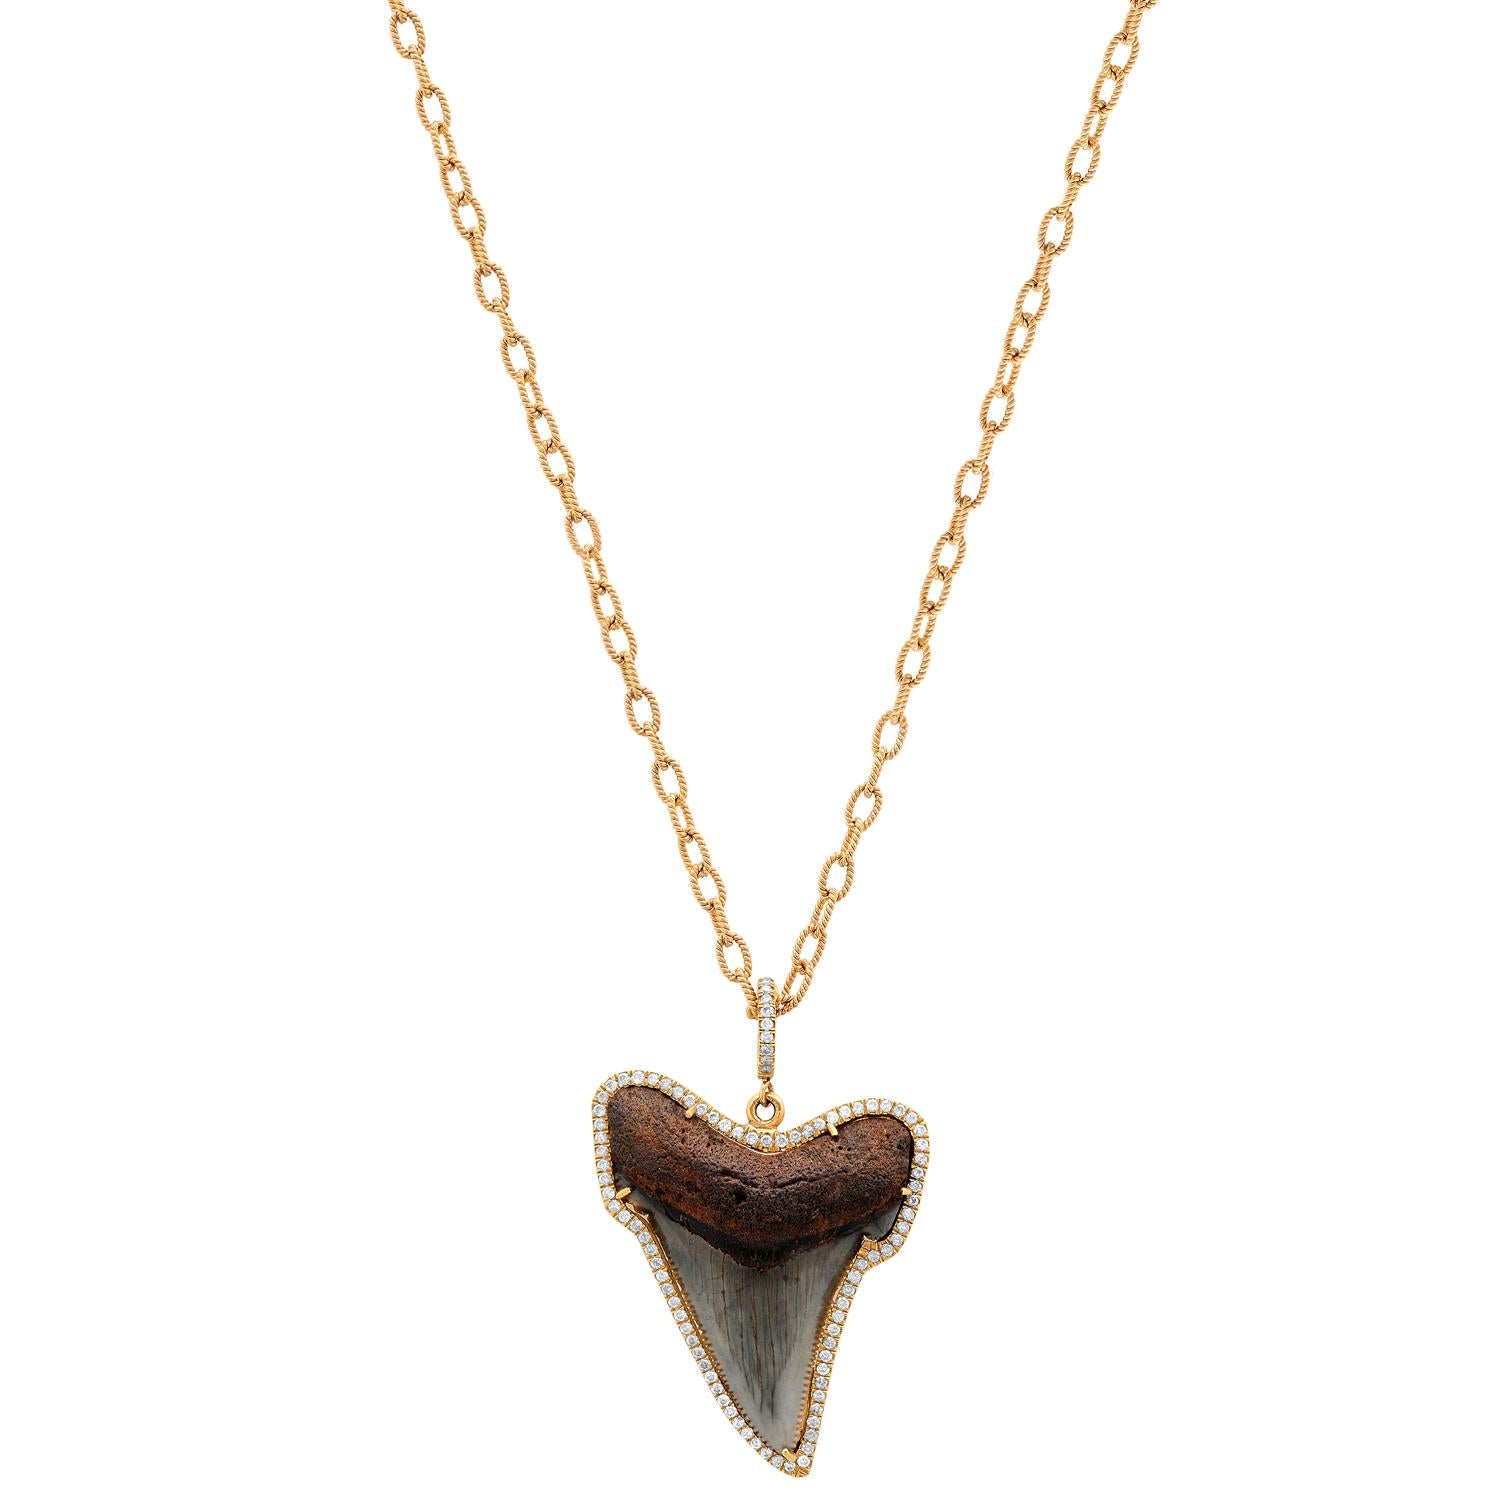 Modern & edgy pave diamond shark tooth pendant necklace from Los Angeles based fine jewelry designer, Samira 13. Each tooth is unique.
Handmade 30